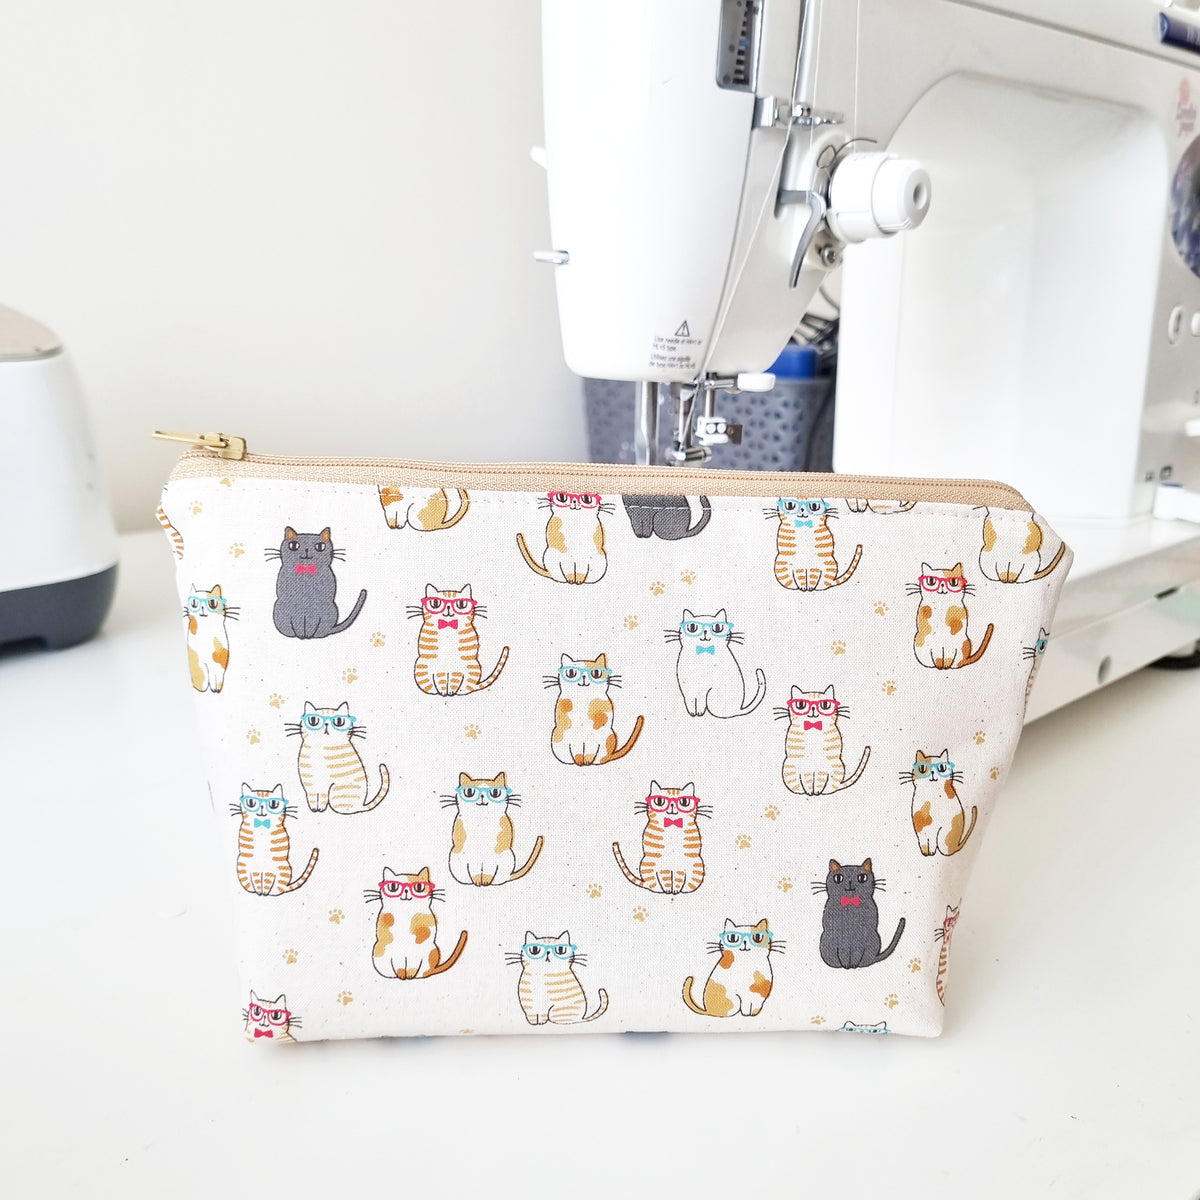 Sewing Scrappy Ebook - Make Cute Things With Scrap Fabric